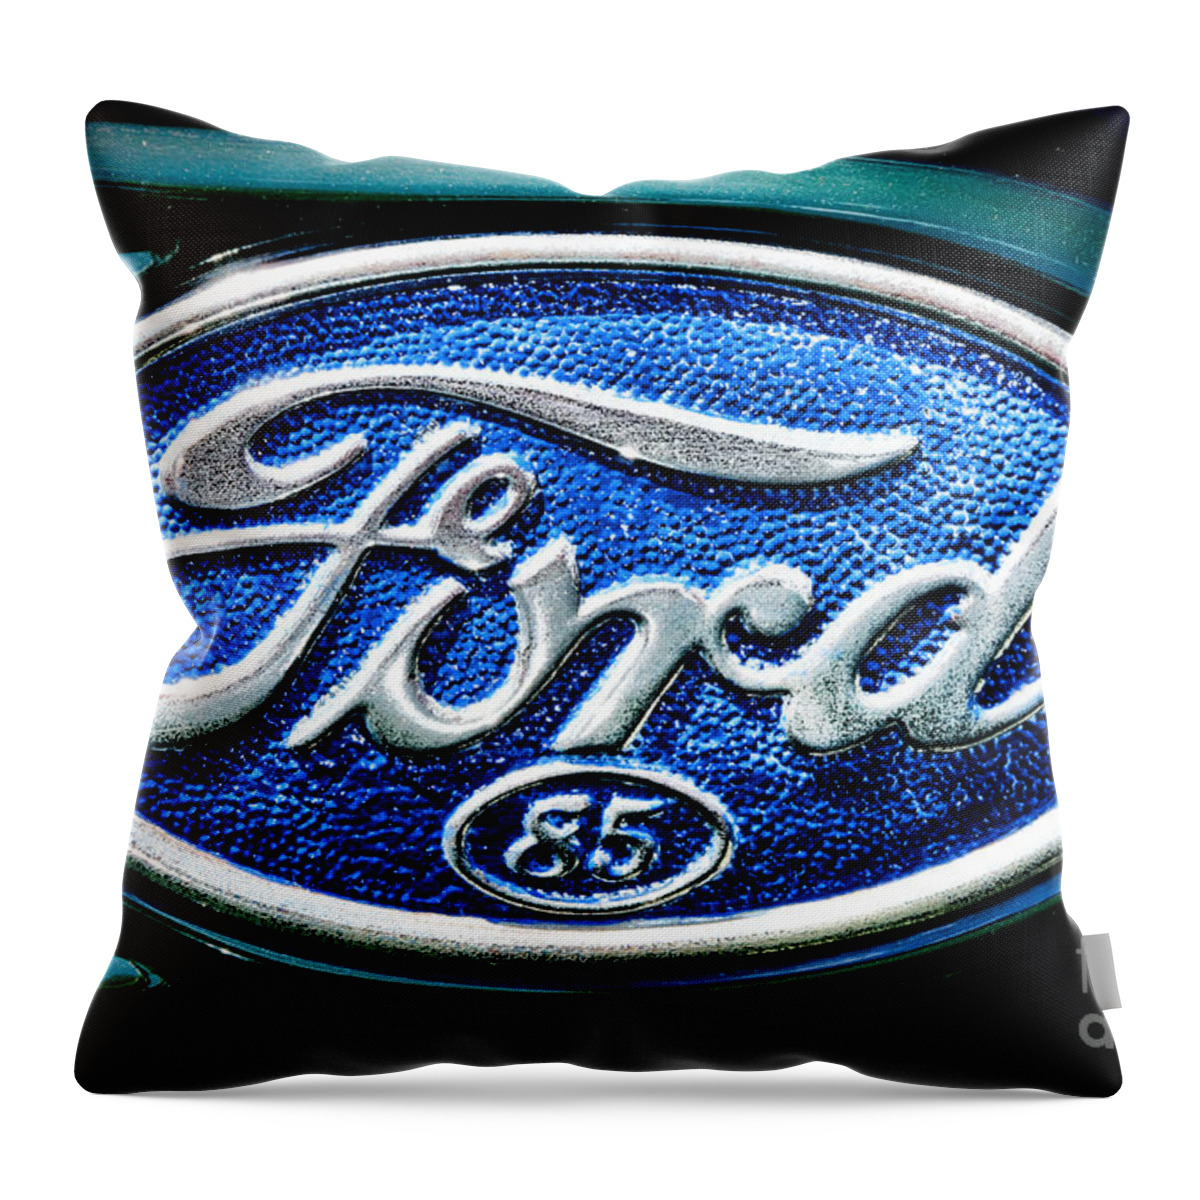 1939 Throw Pillow featuring the photograph Antique Ford Badge by Olivier Le Queinec